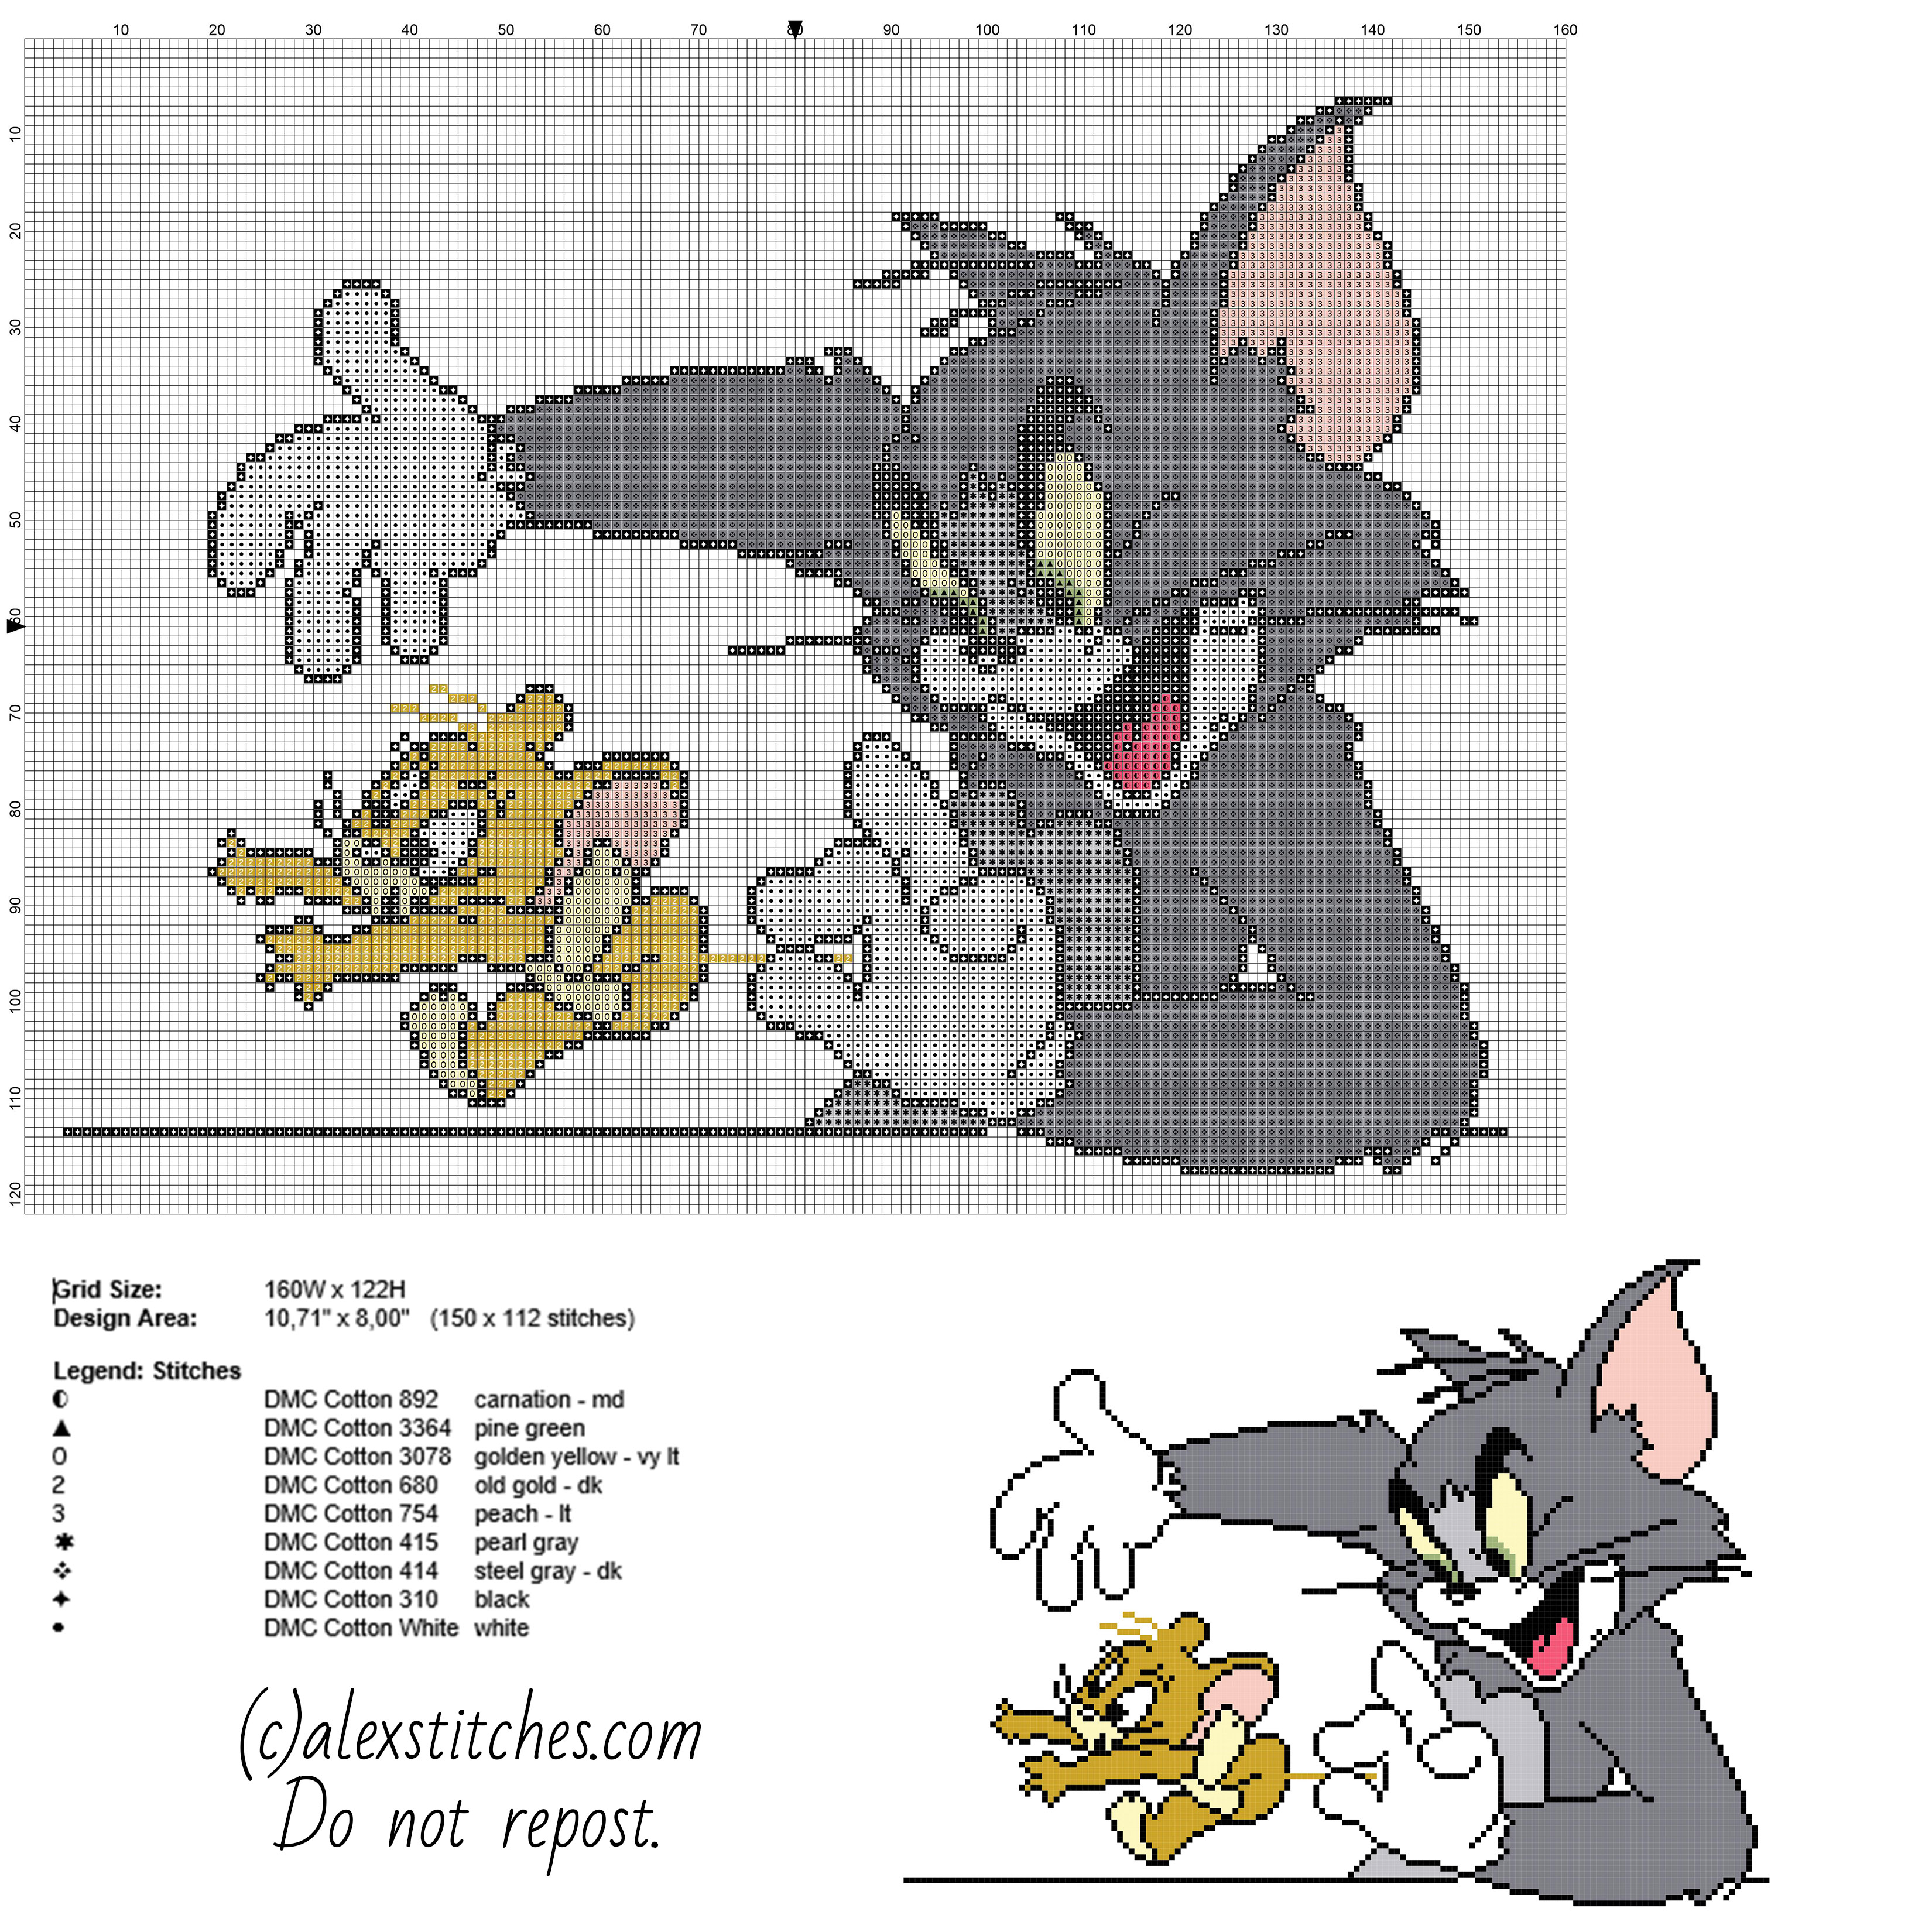 Tom chases Jerry free cross stitch pattern from Tom and Jerry cartoon baby blanket idea